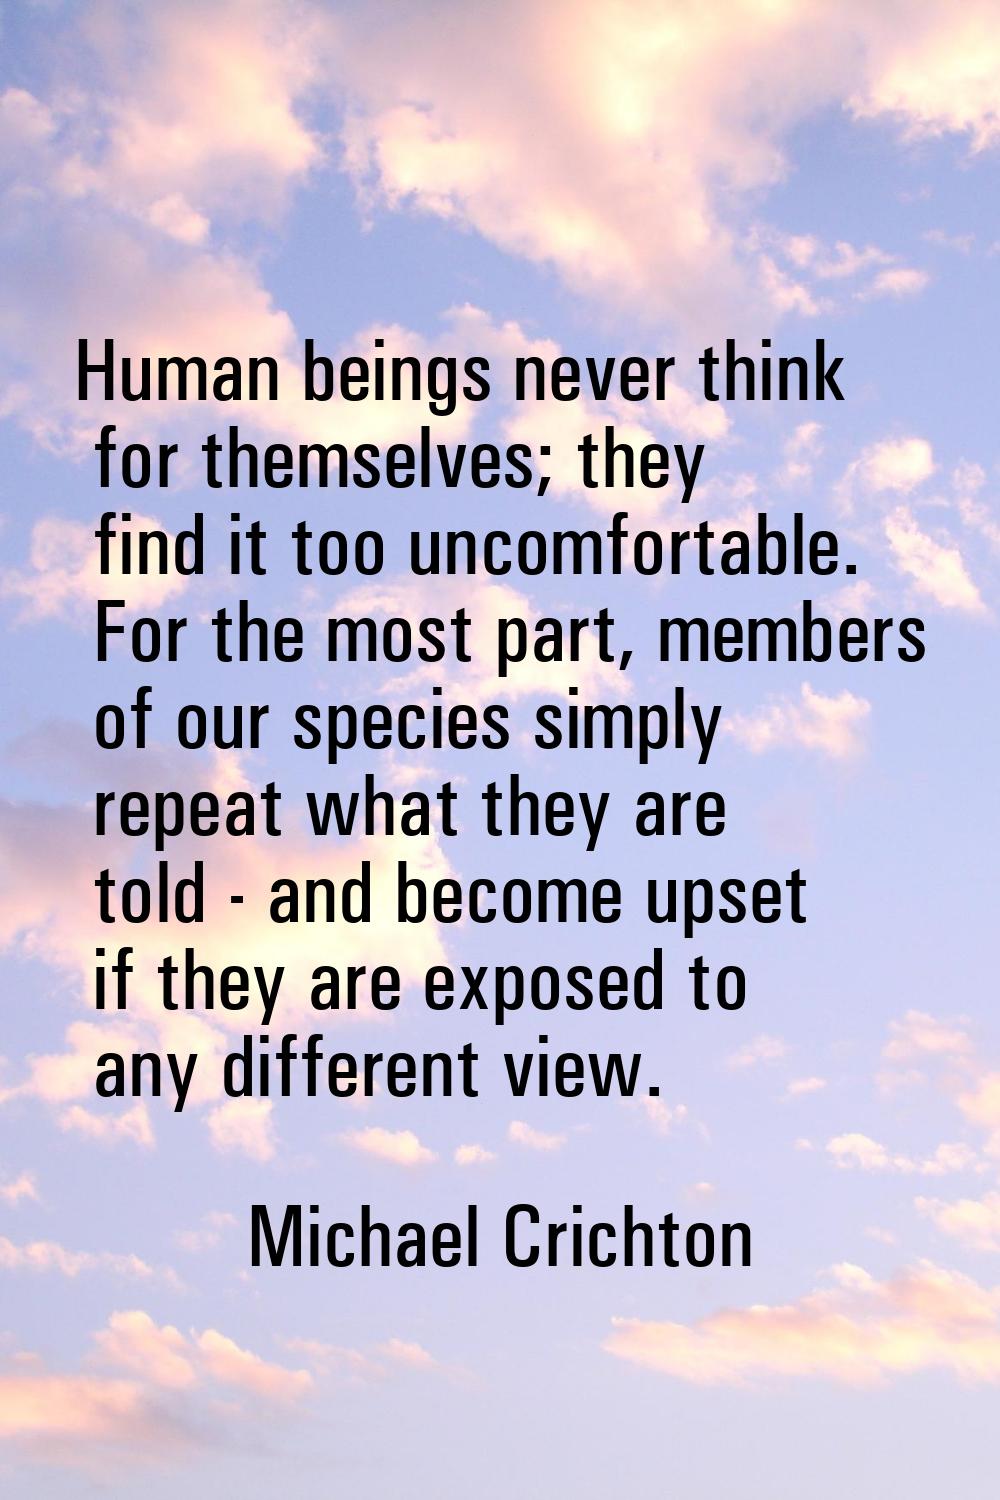 Human beings never think for themselves; they find it too uncomfortable. For the most part, members